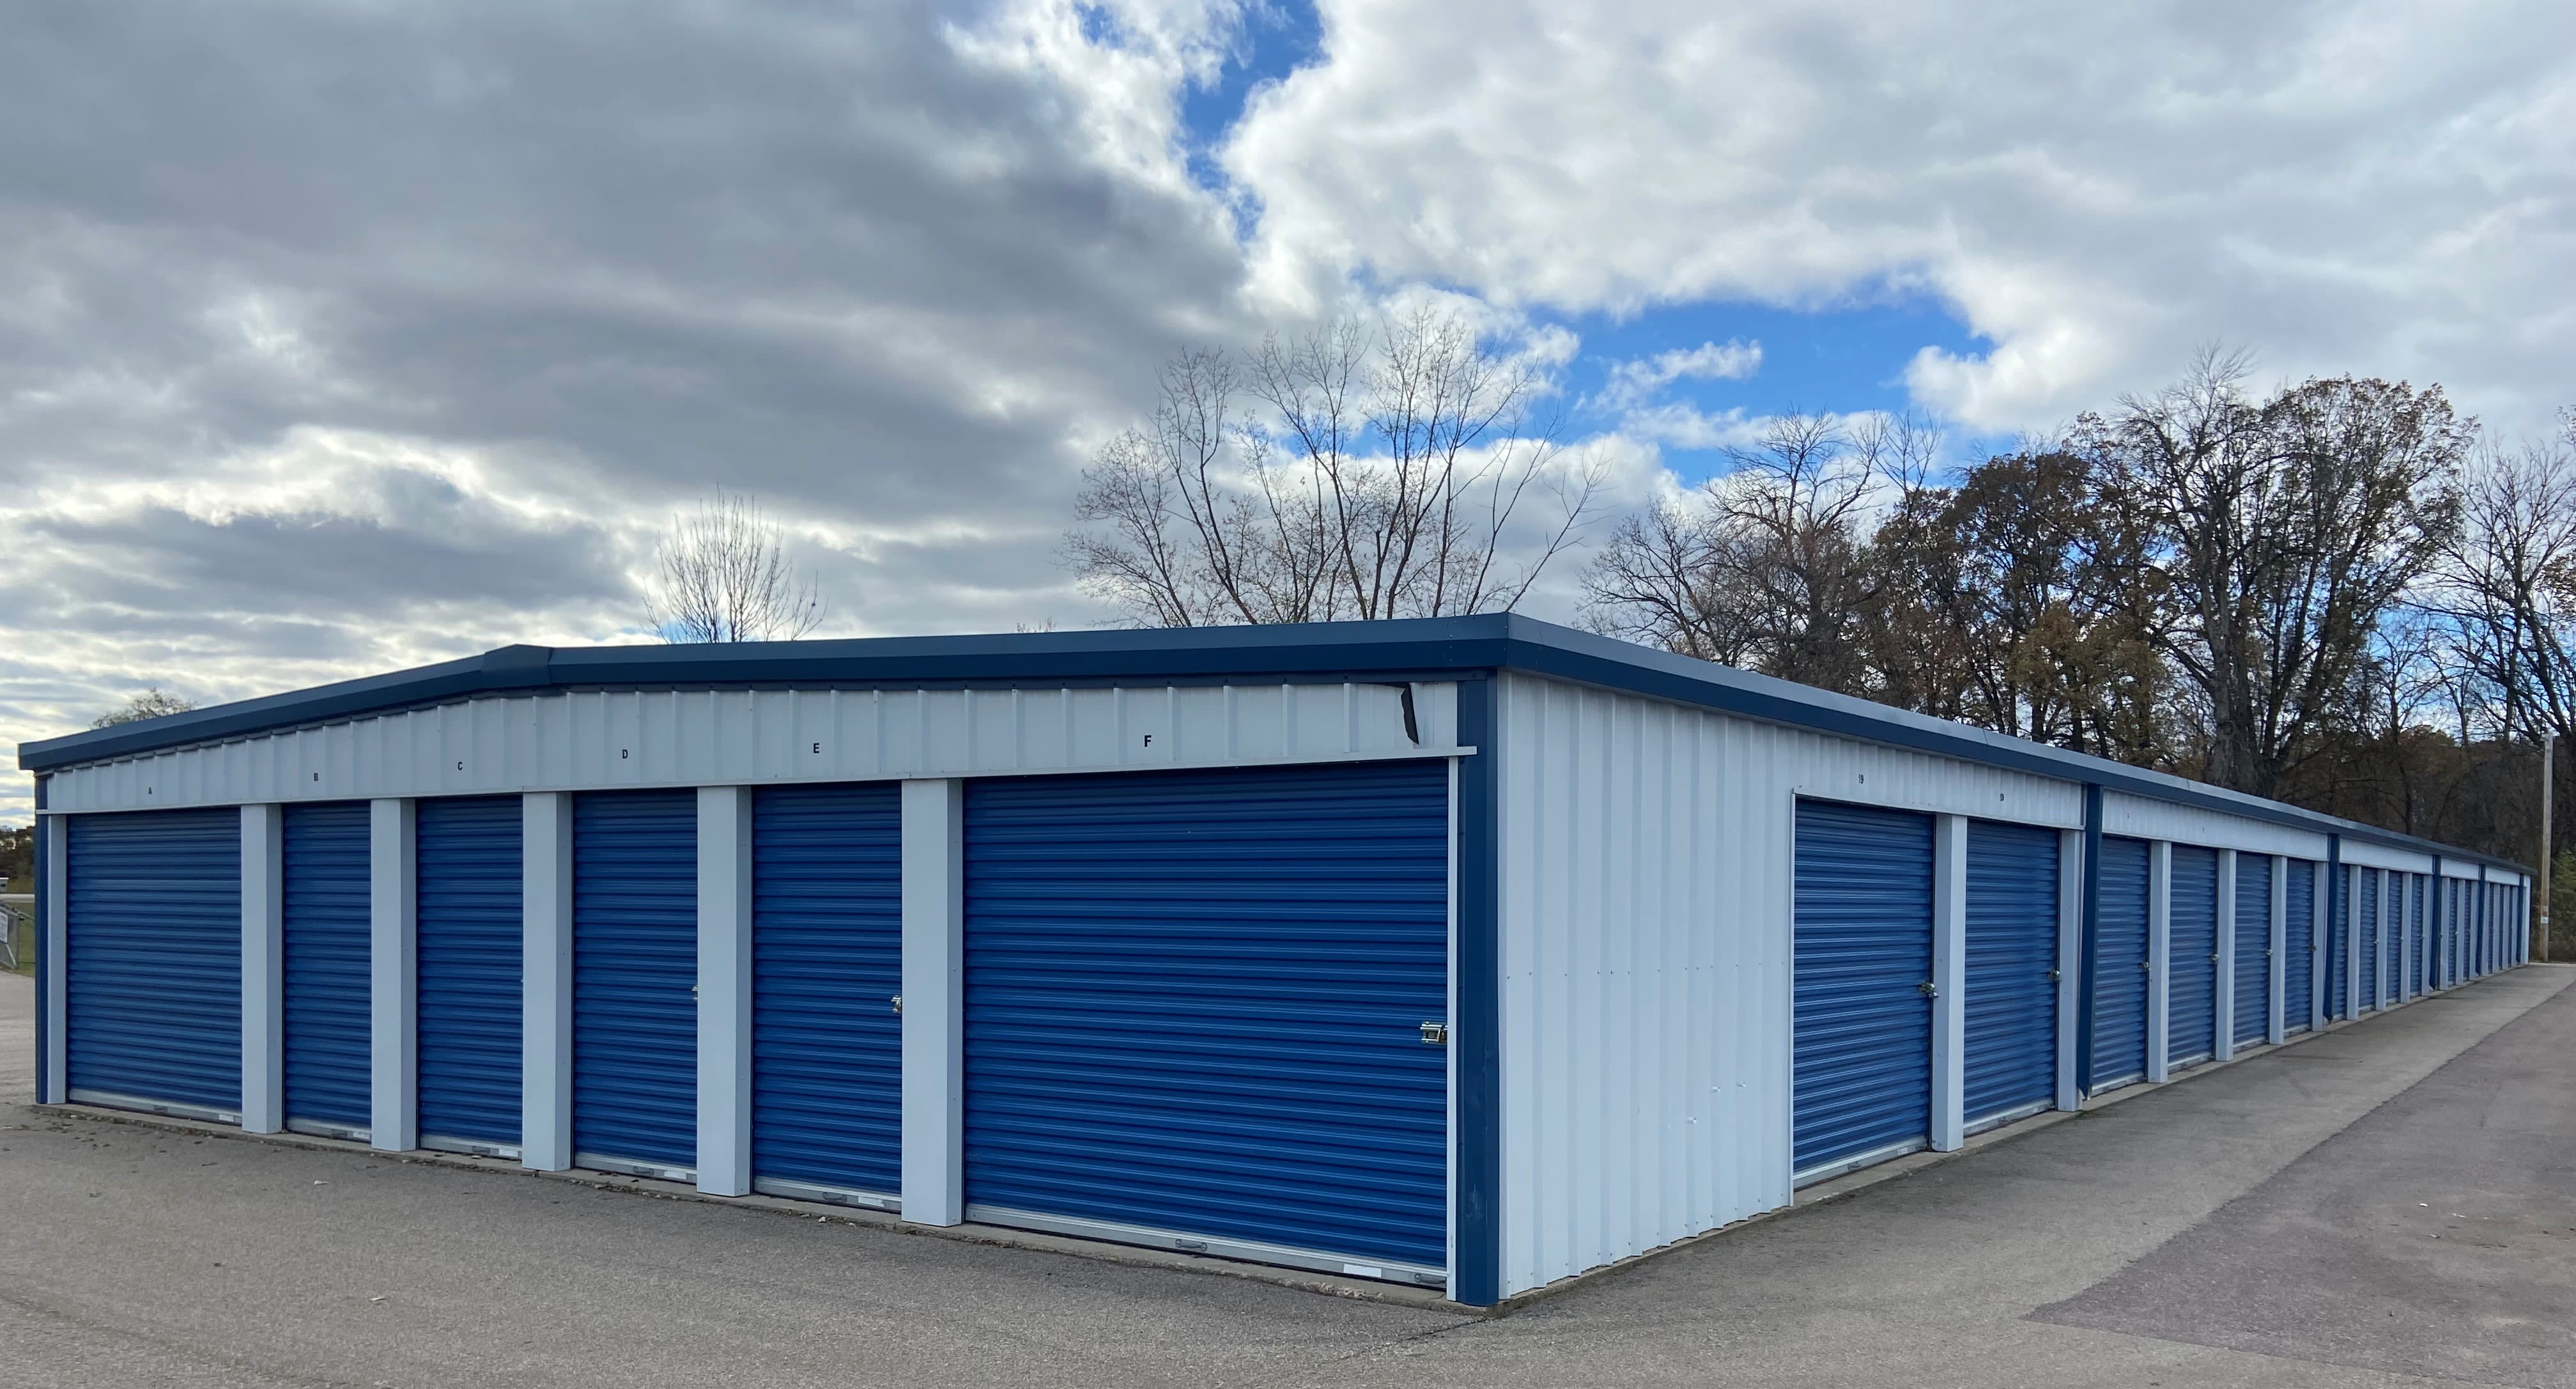 Storage units with blue doors at KO Storage in Wisconsin Dells, Wisconsin